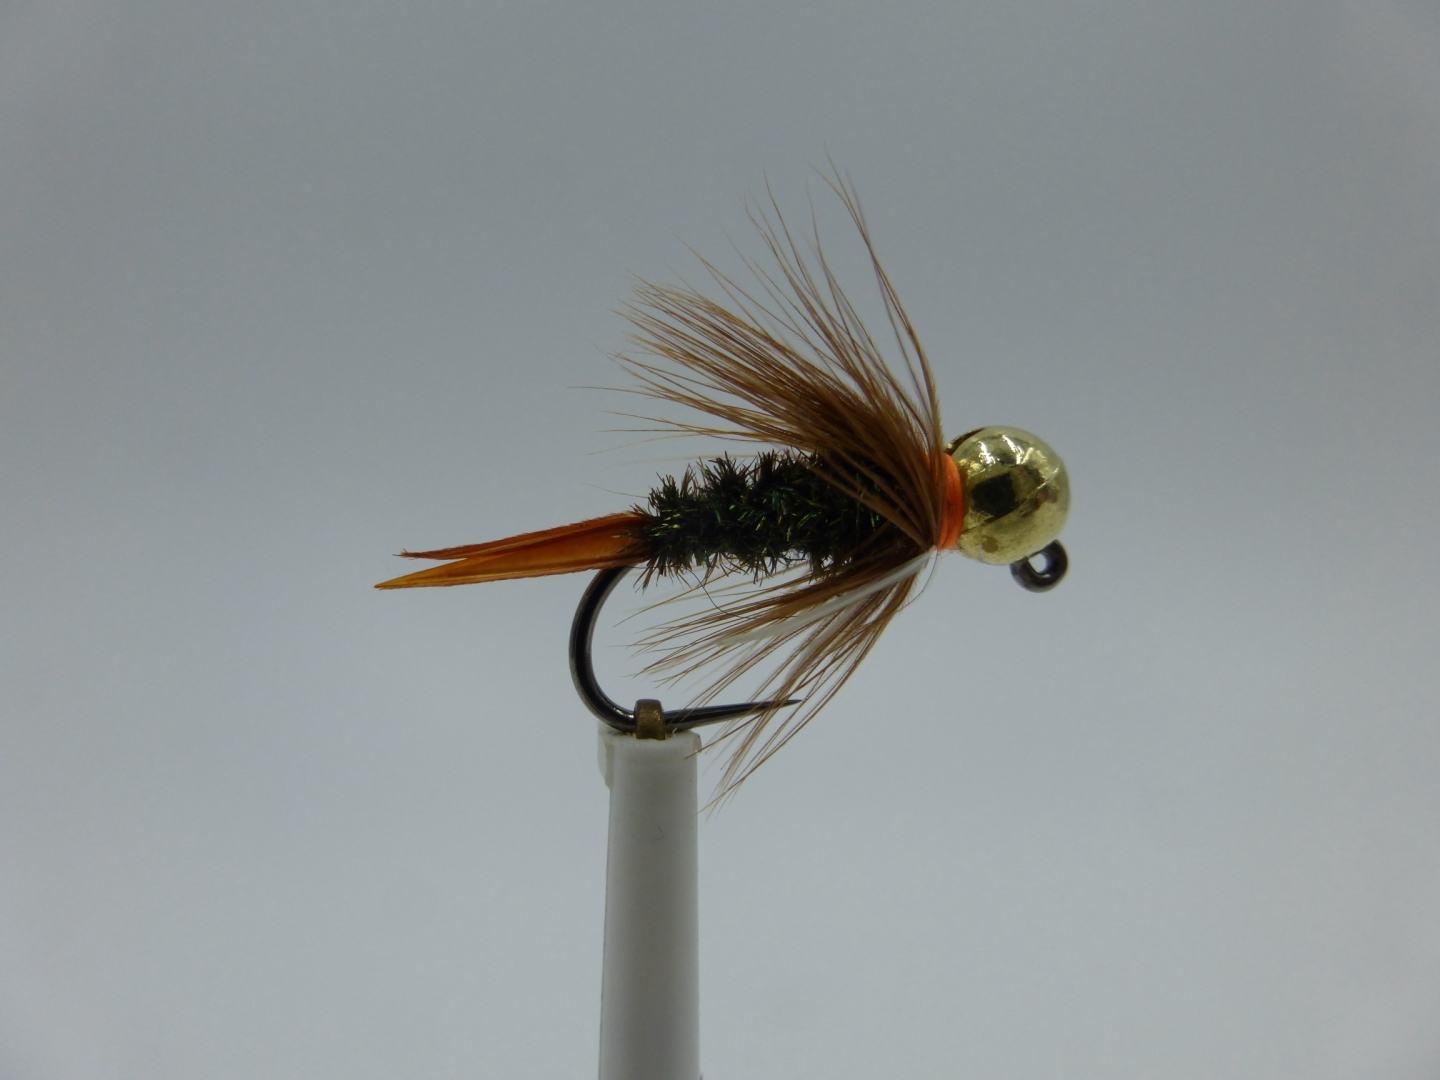 Size 16 Tungsten - Jigged Prince Nymph - Barbless